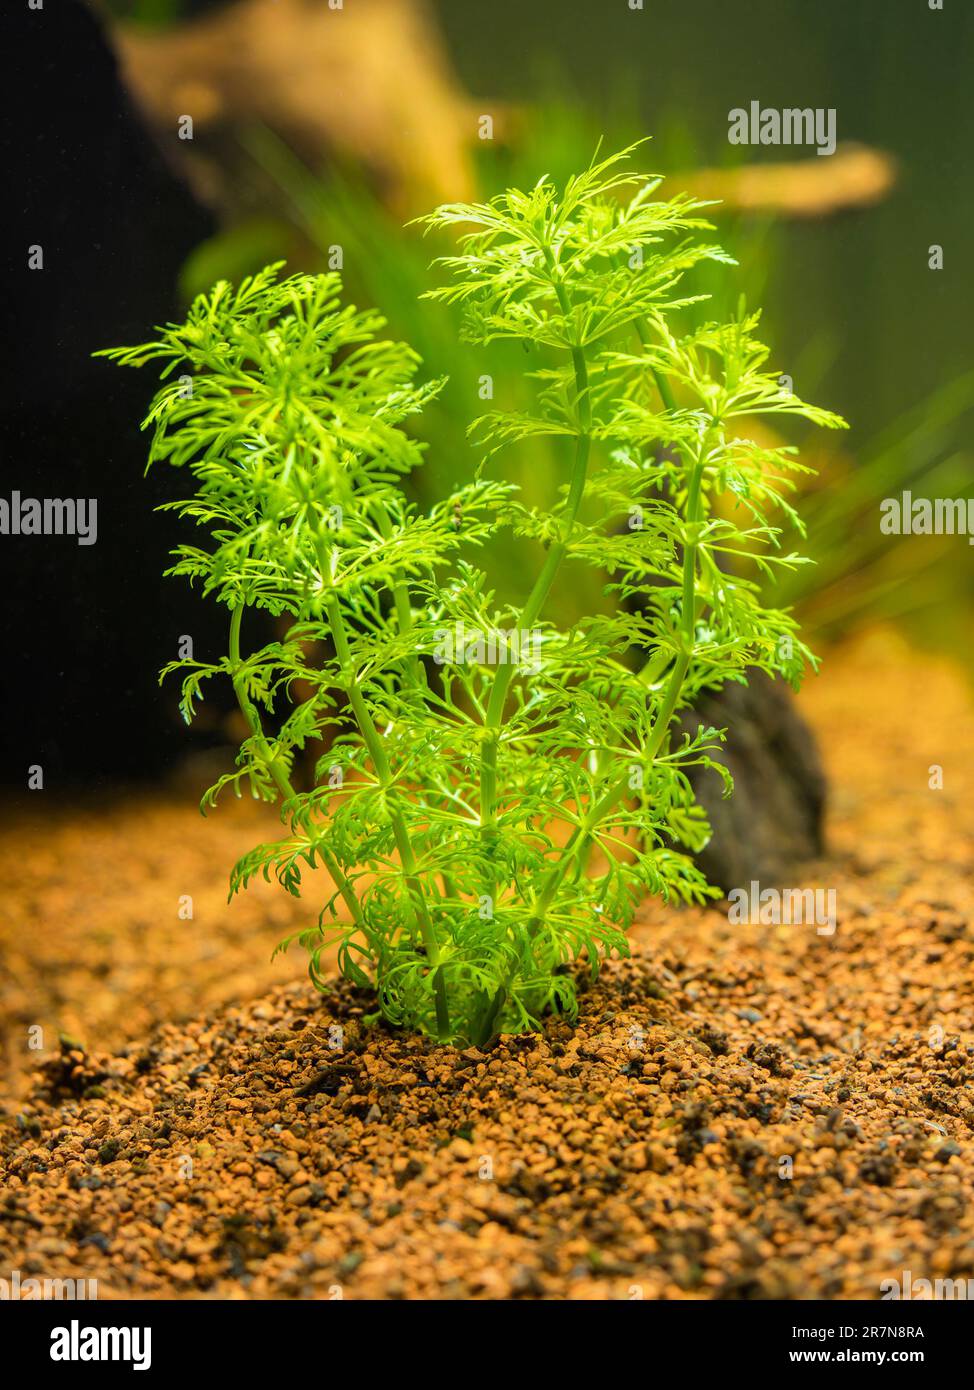 Selective focus of an ambulia (Limnophila sessiliflora) isolated on a fish tank with blurred background Stock Photo